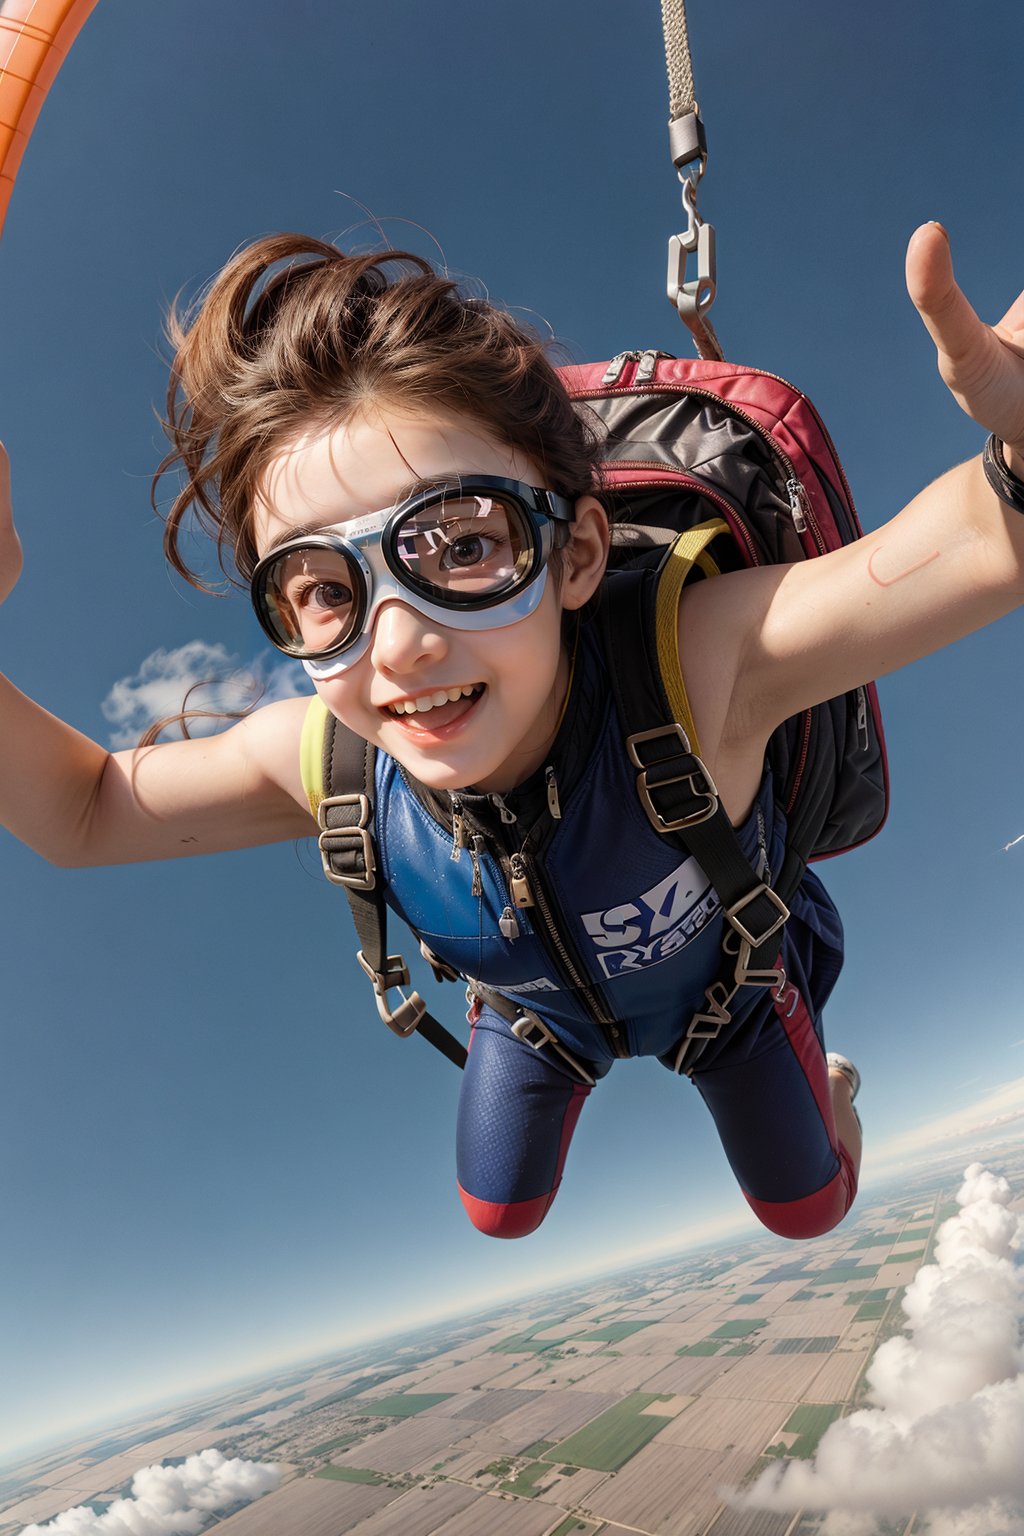 (Arealistic image of a woman skydiving with a sense of speed and excitement), wearing shorts, (free-falling skydiving through the sky:1.1), (perfect skydiving 

free fall pose:1.2), with her hair and cleavage clothes fluttering in the wind, 

the background is a bright, clear sky with 

a few fluffy clouds, wearing a colorful and cute outfit with vibrant patterns, skydiving backpack, (detailed skydiving goggles:1.3), the woman's face is clearly visible, showing ajoyful and exhilarated expression, 

,SteampunkCh,zzxxzz